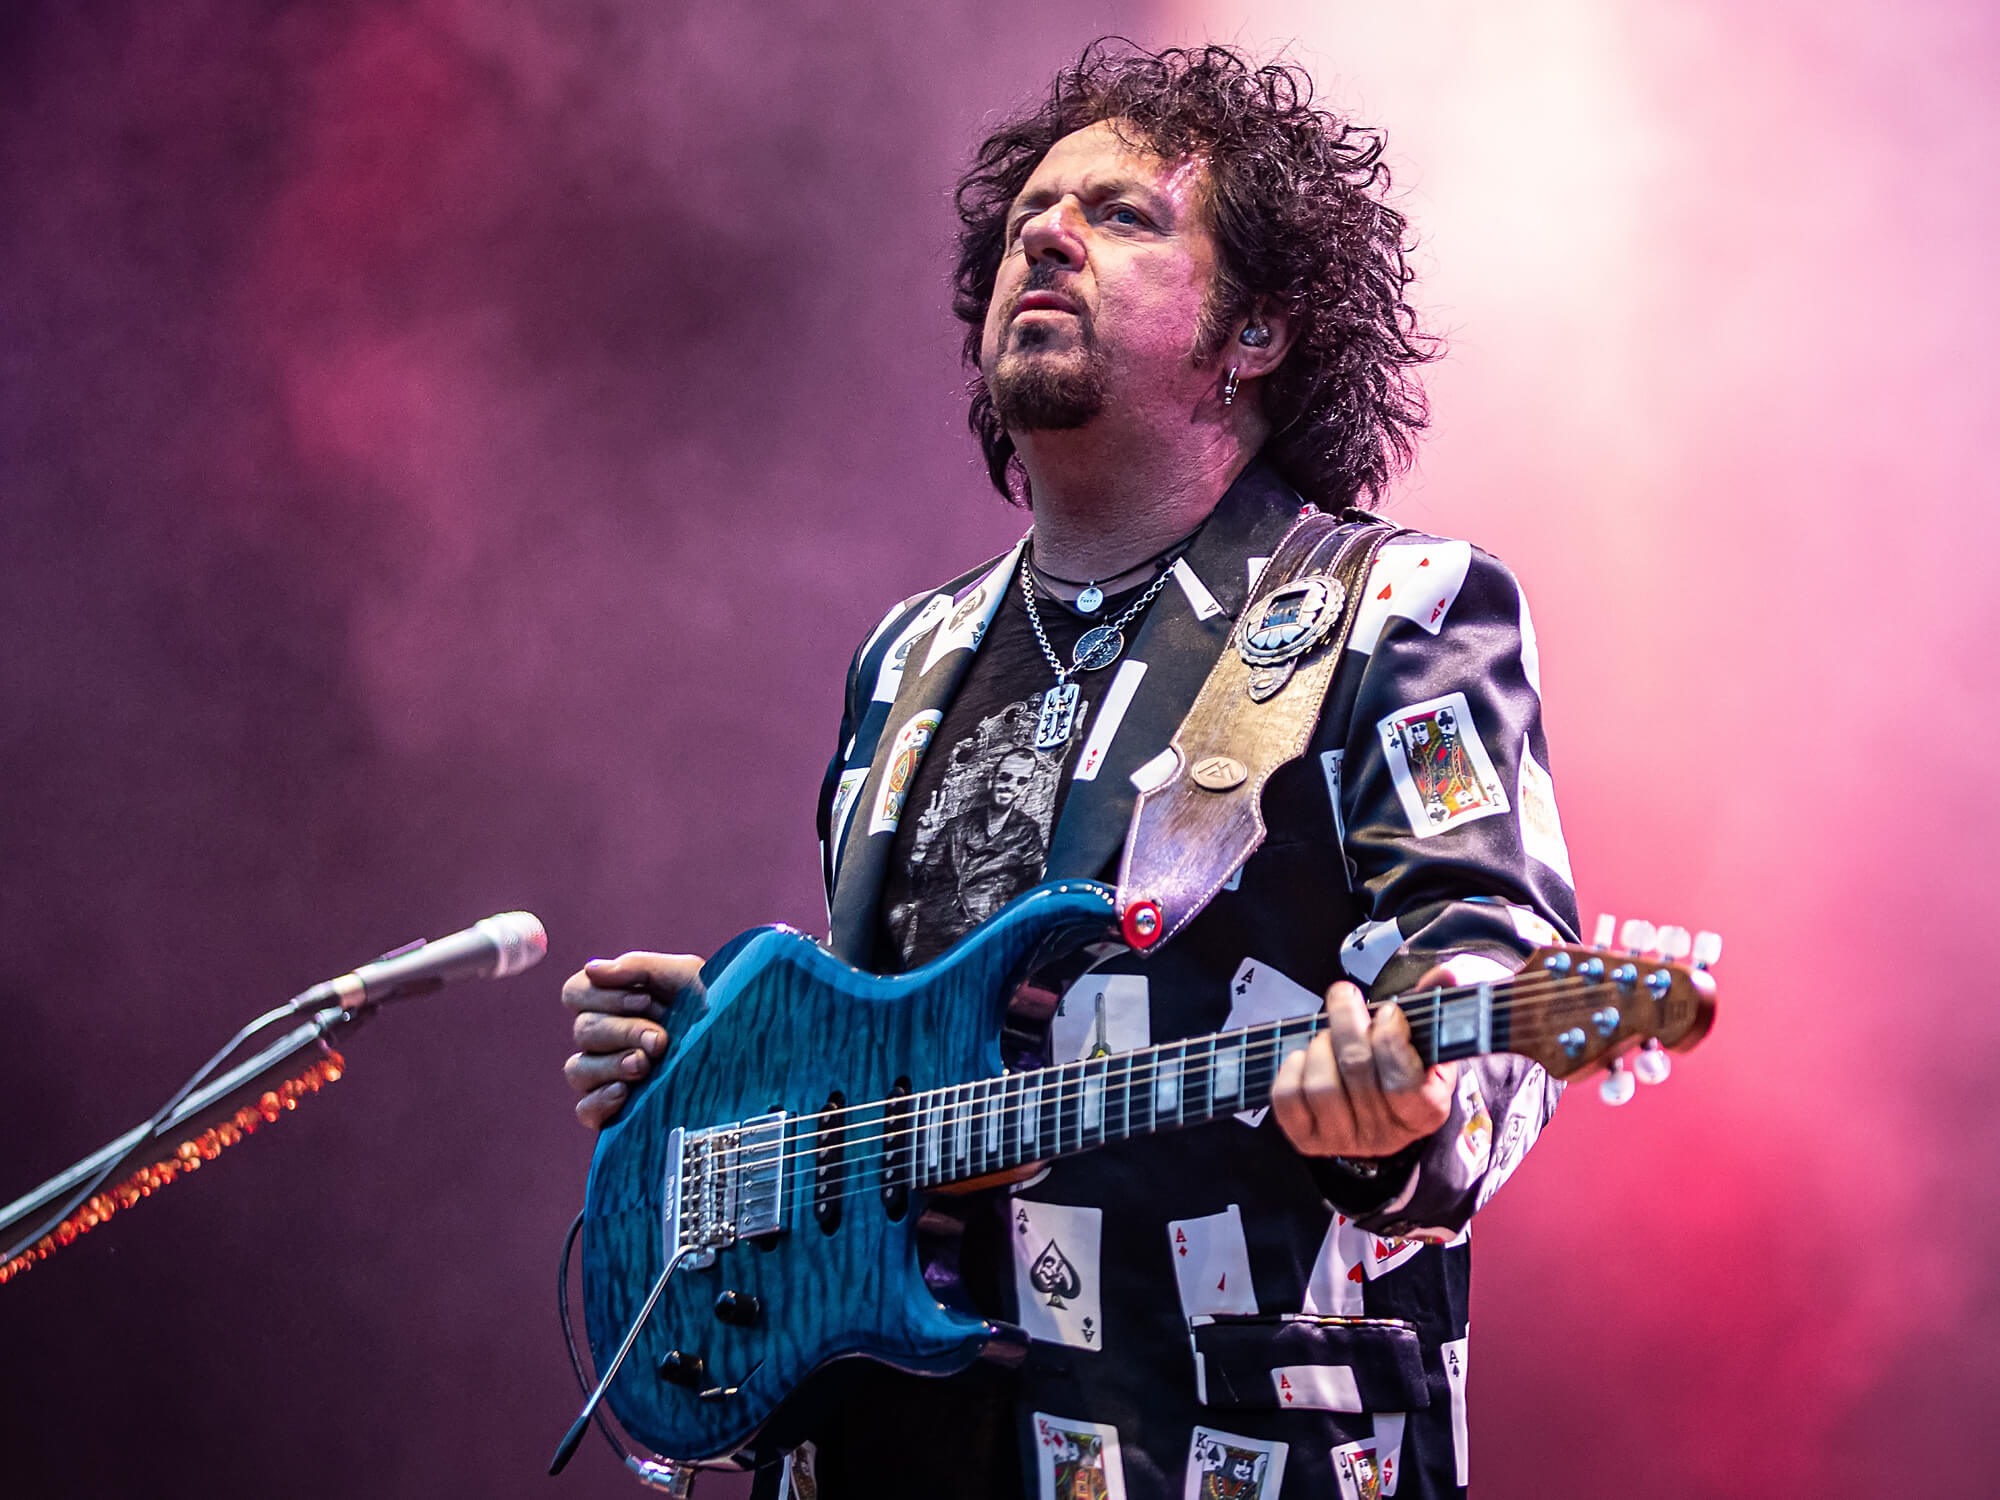 Steve Lukather of Toto